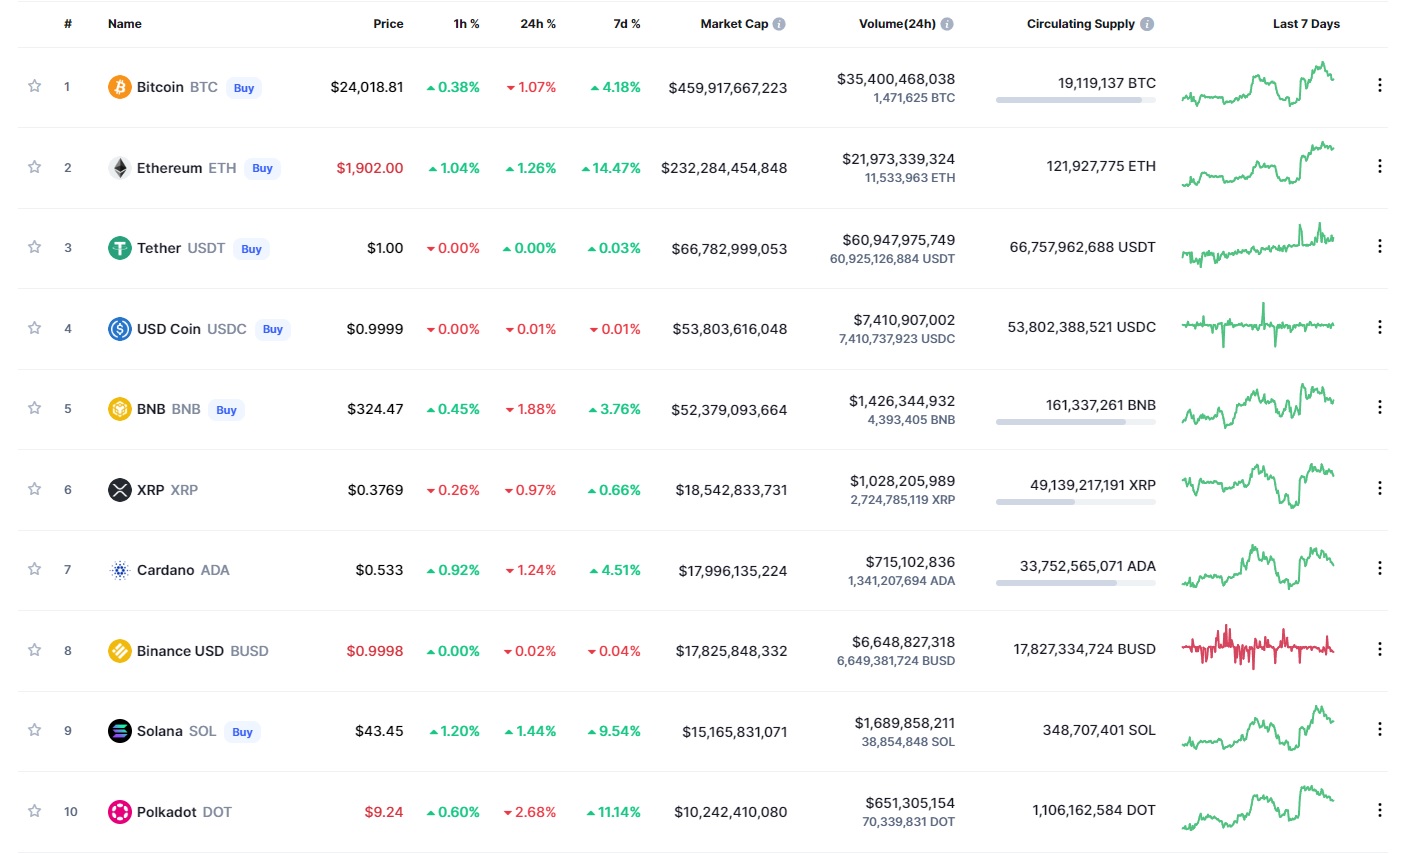 top cryptocurrencies by volume